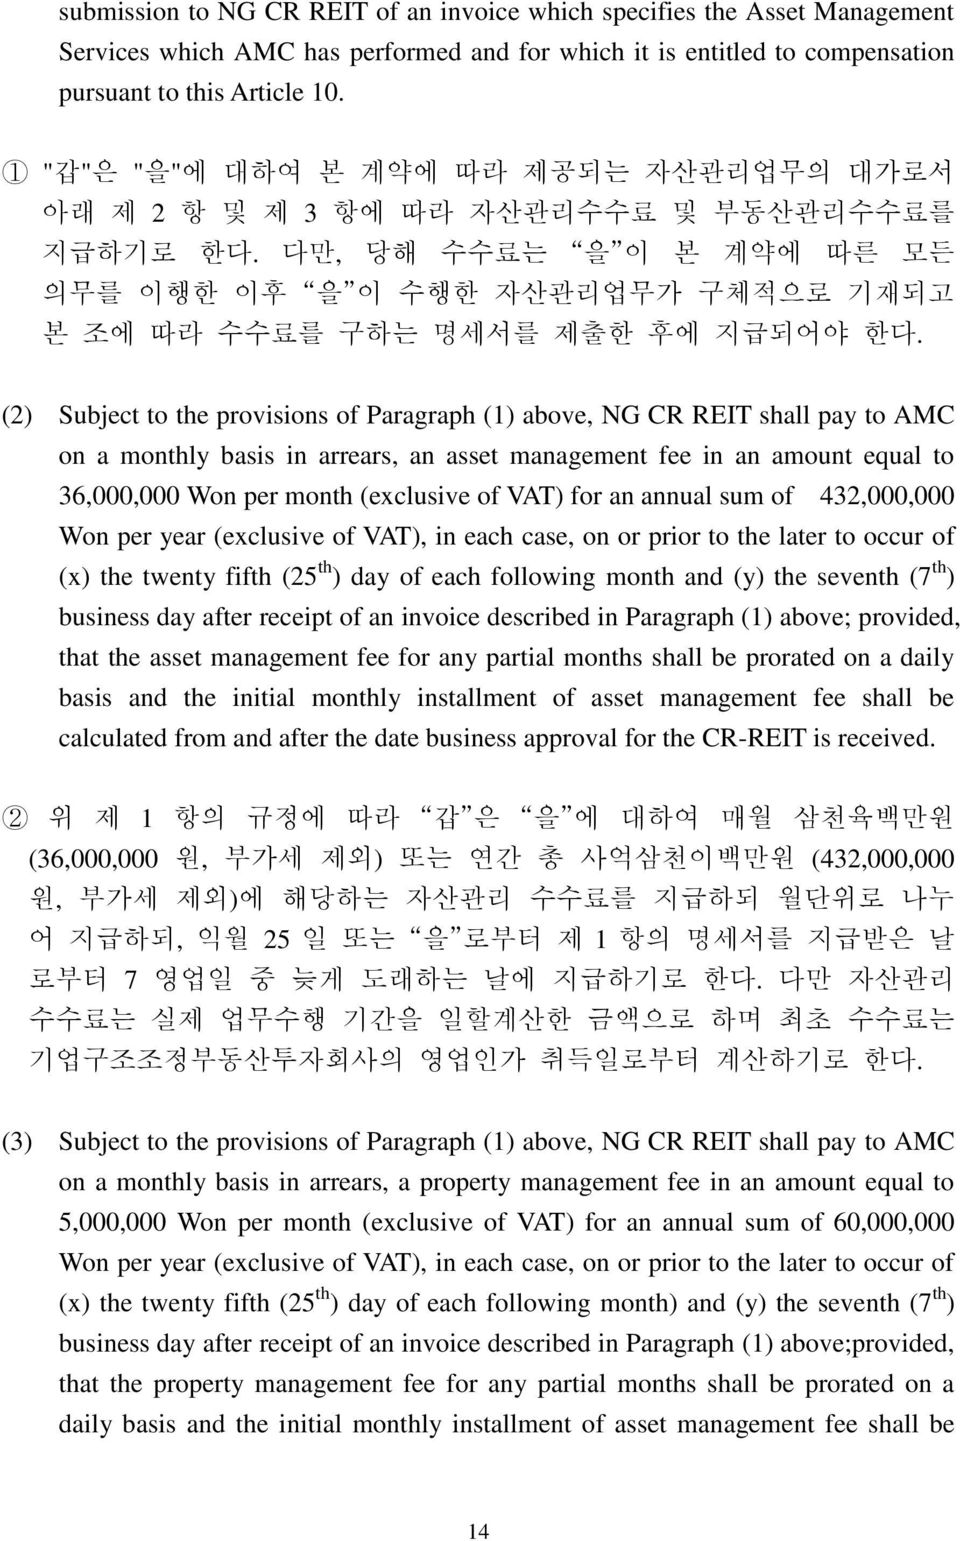 (2) Subject to the provisions of Paragraph (1) above, NG CR REIT shall pay to AMC on a monthly basis in arrears, an asset management fee in an amount equal to 36,000,000 Won per month (exclusive of